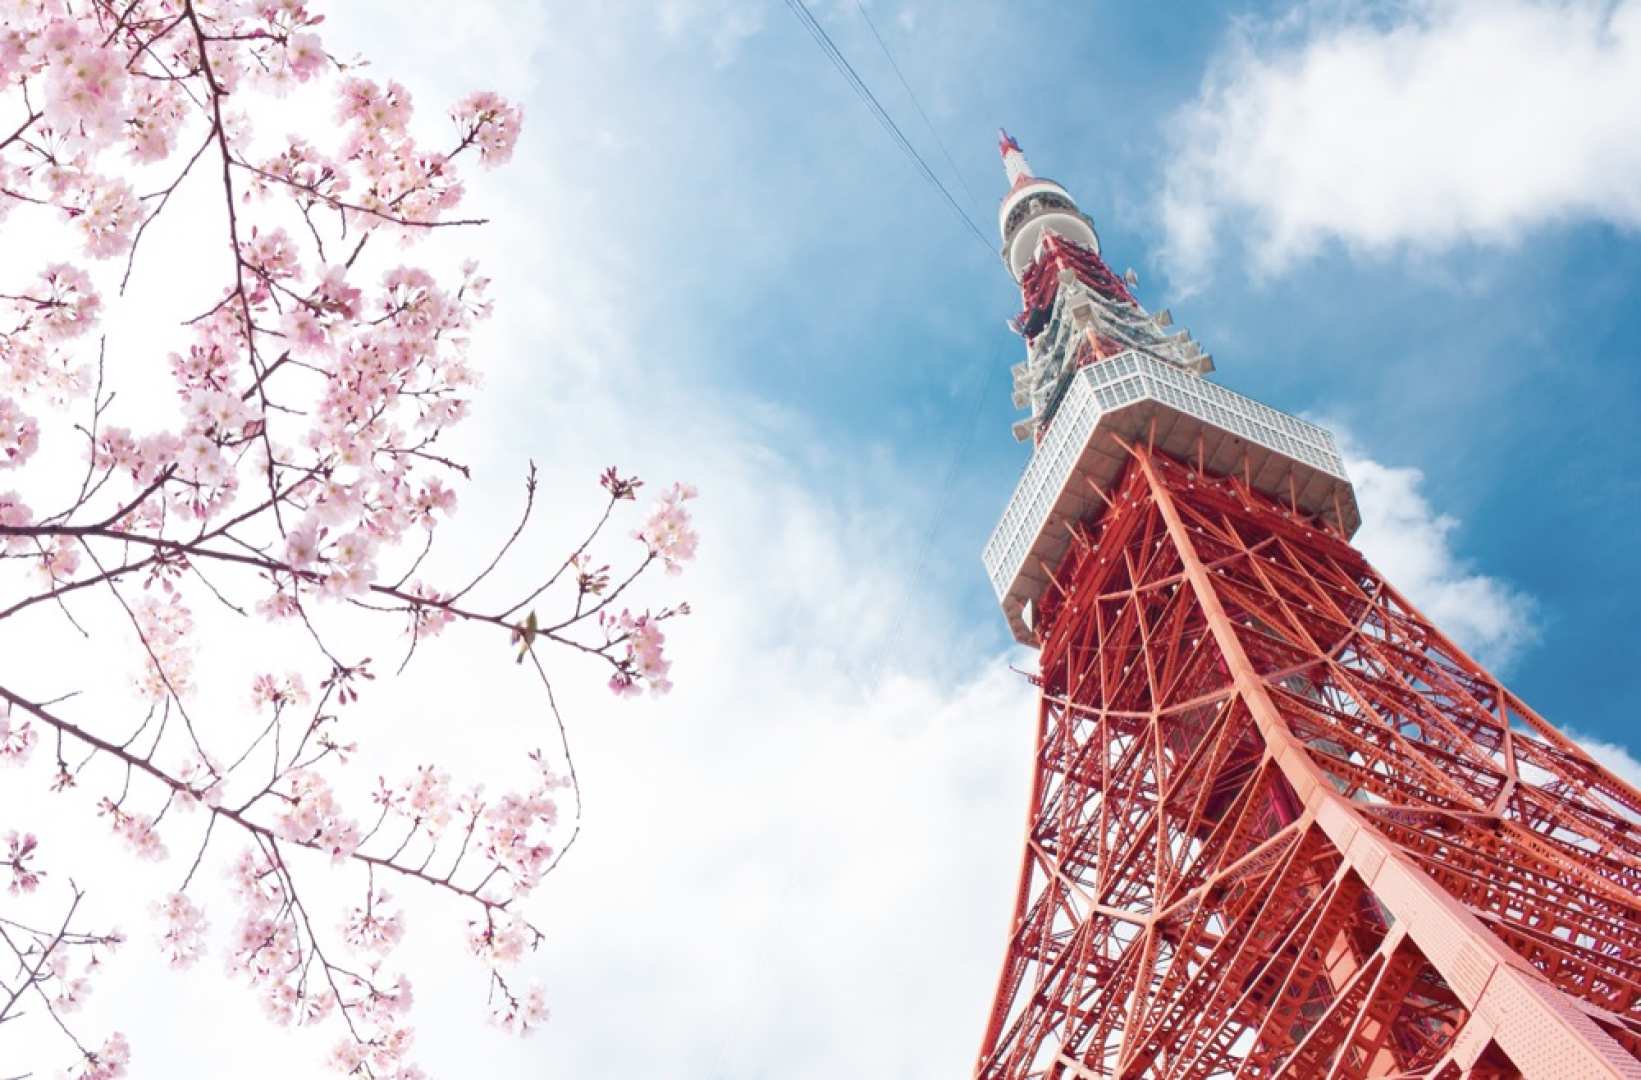 Transfers from Japan’s Narita Airport (NRT) and Haneda Airport (HND) to downtown Tokyo, Disney, Mount Fuji, Hakone and other areas | Airport transfers